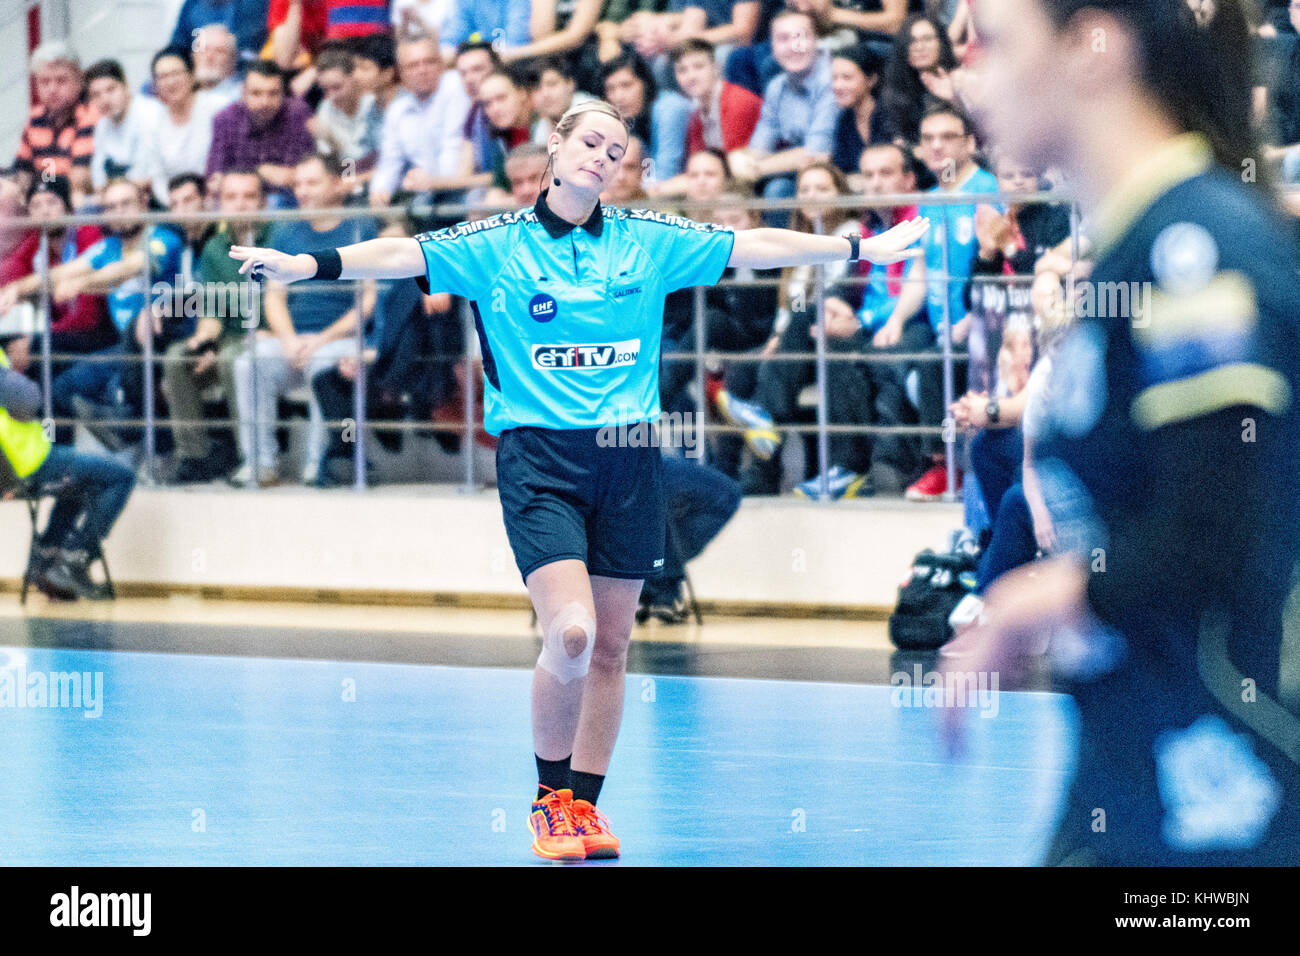 November 19, 2017: Marlis Wenninger (EHF Referee from Austria) during the EHF Woman's Champions League game between  CSM Bucharest (ROU) vs Vistal Gdynia (POL) at Dinamo Polyvalent Hall in Bucharest, Romania ROU. Copyright: Cronos/Catalin Soare Stock Photo